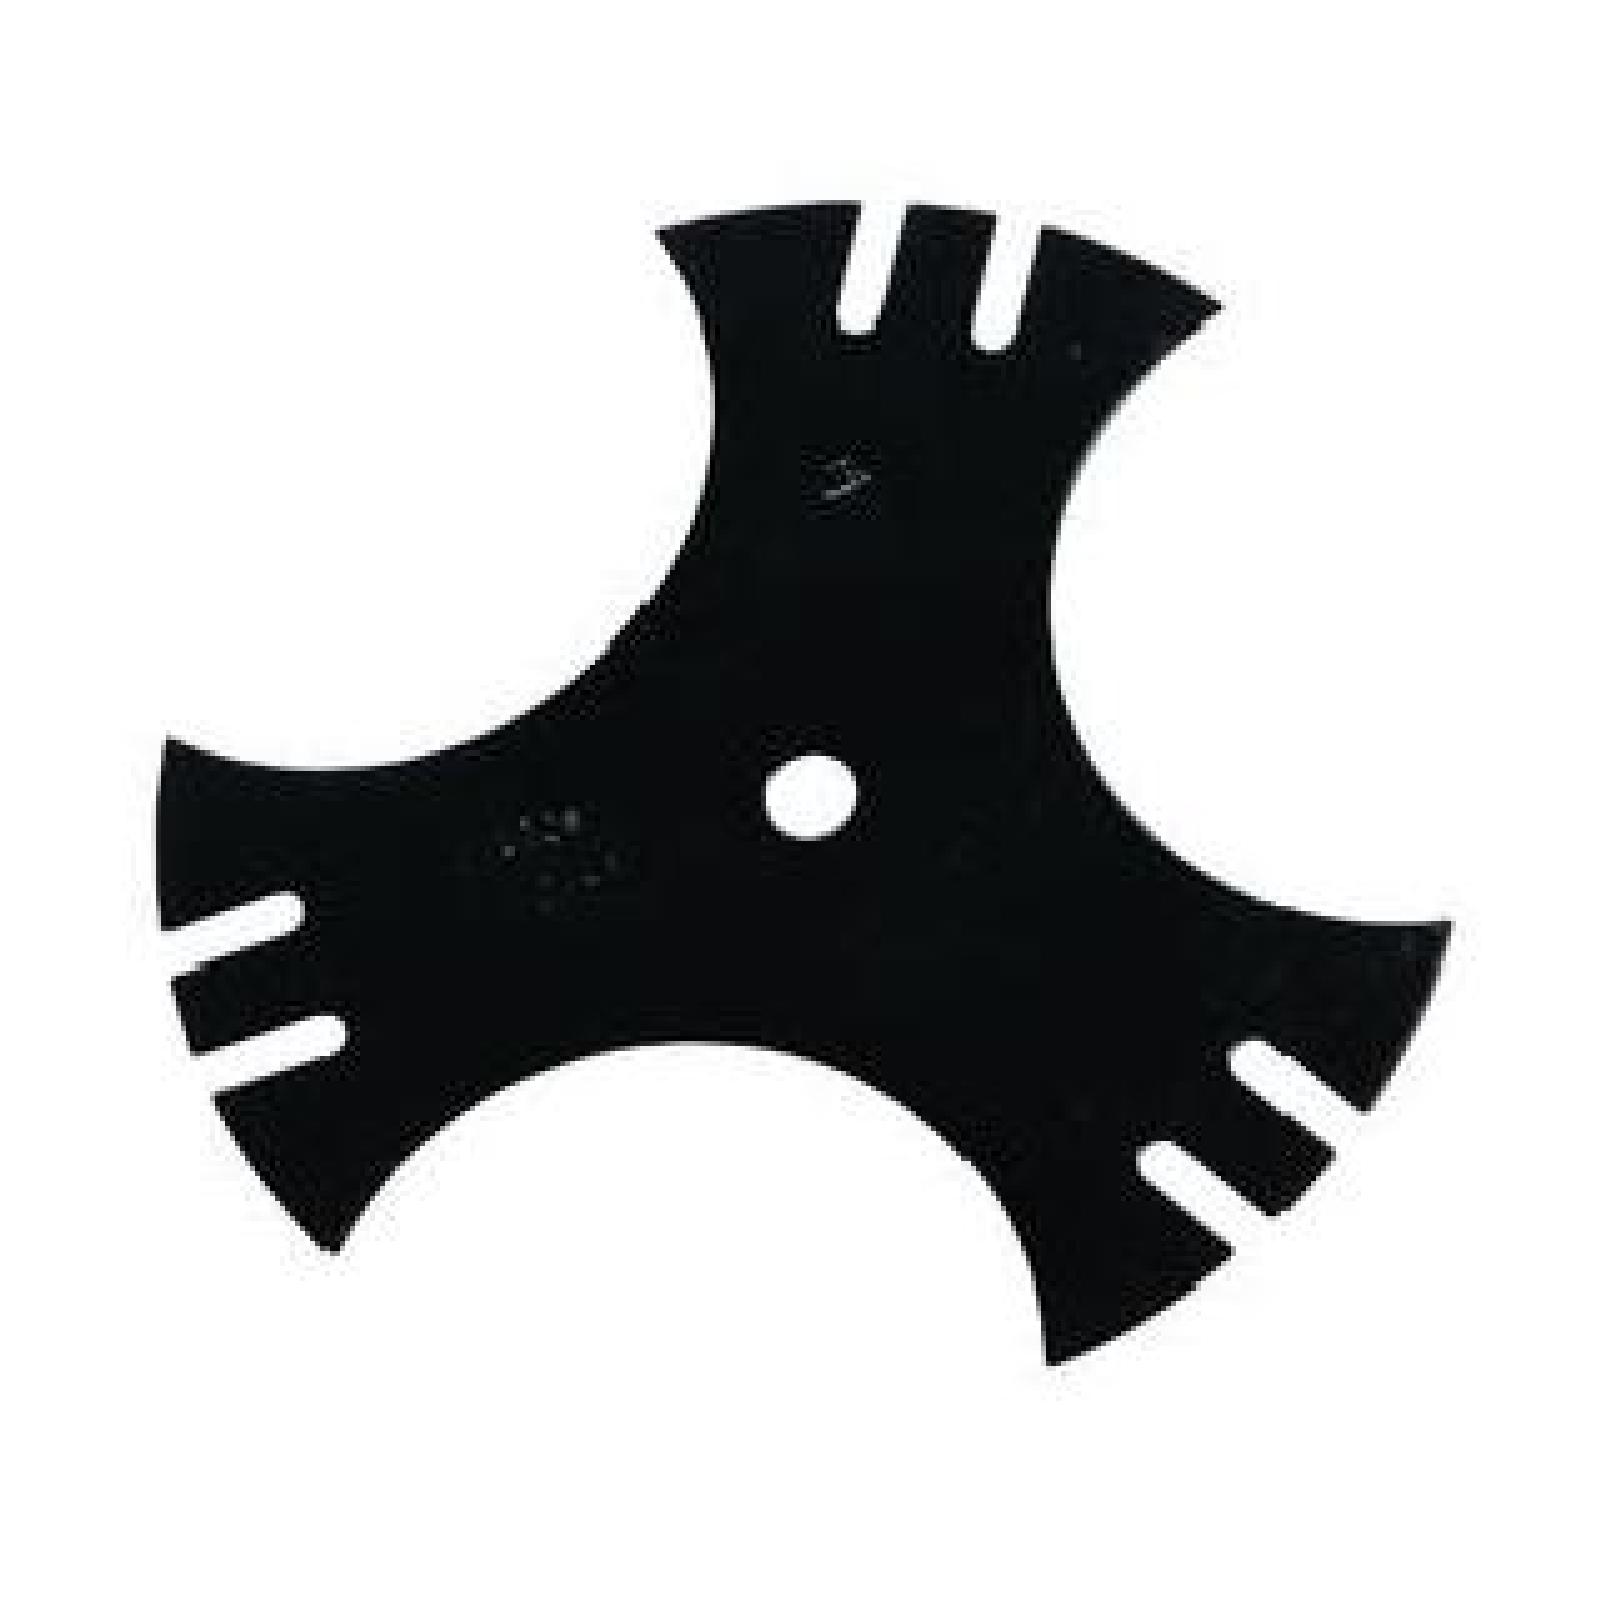 EDGER BLADE, 9IN X 5/8 3 part# 40-009 by Oregon - Click Image to Close